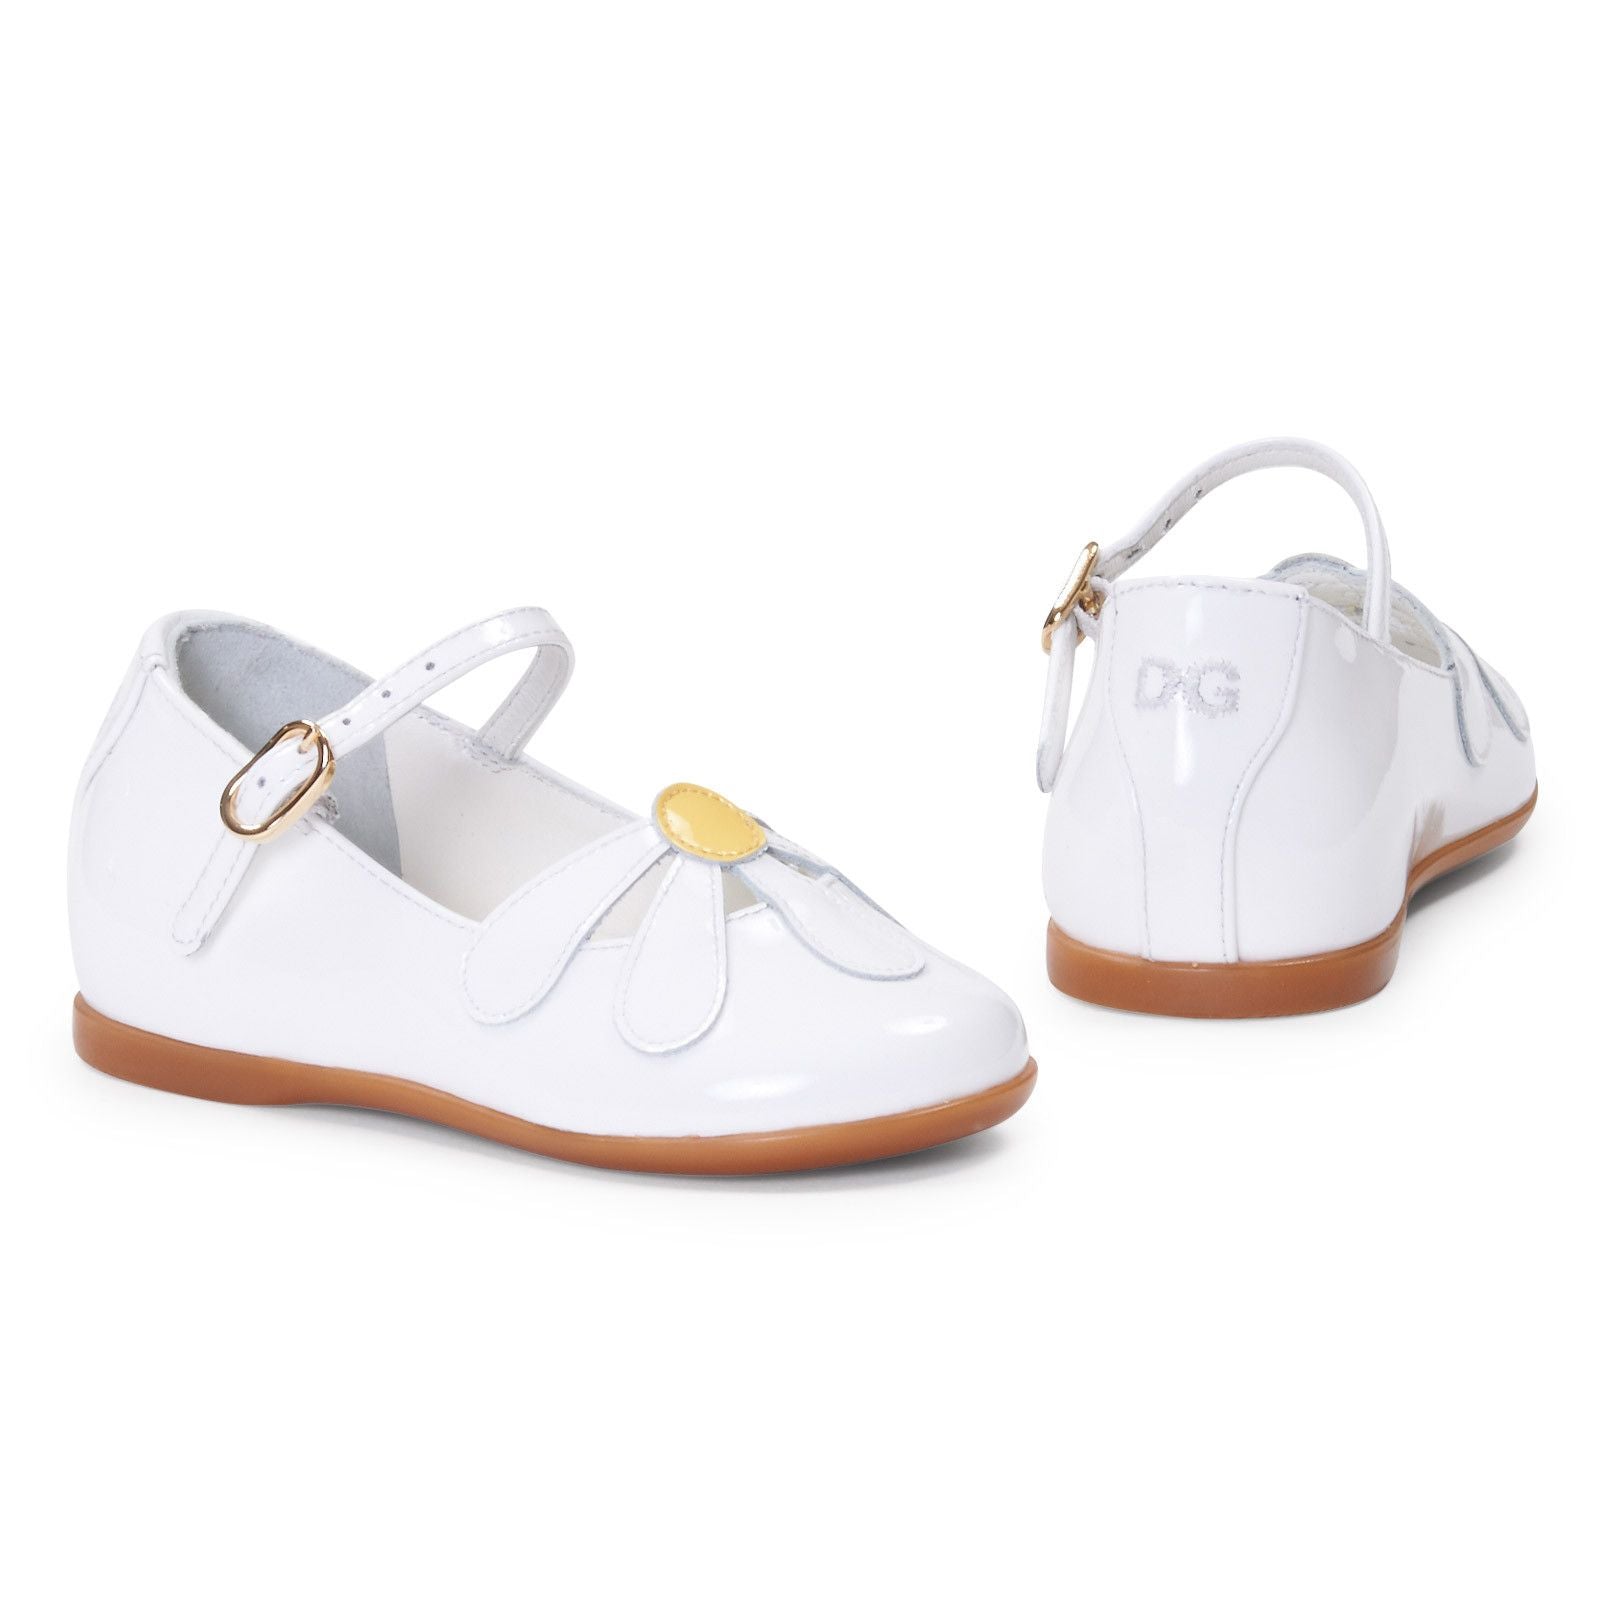 Baby Girls White Leather Sandal With White Patch Flower Trims - CÉMAROSE | Children's Fashion Store